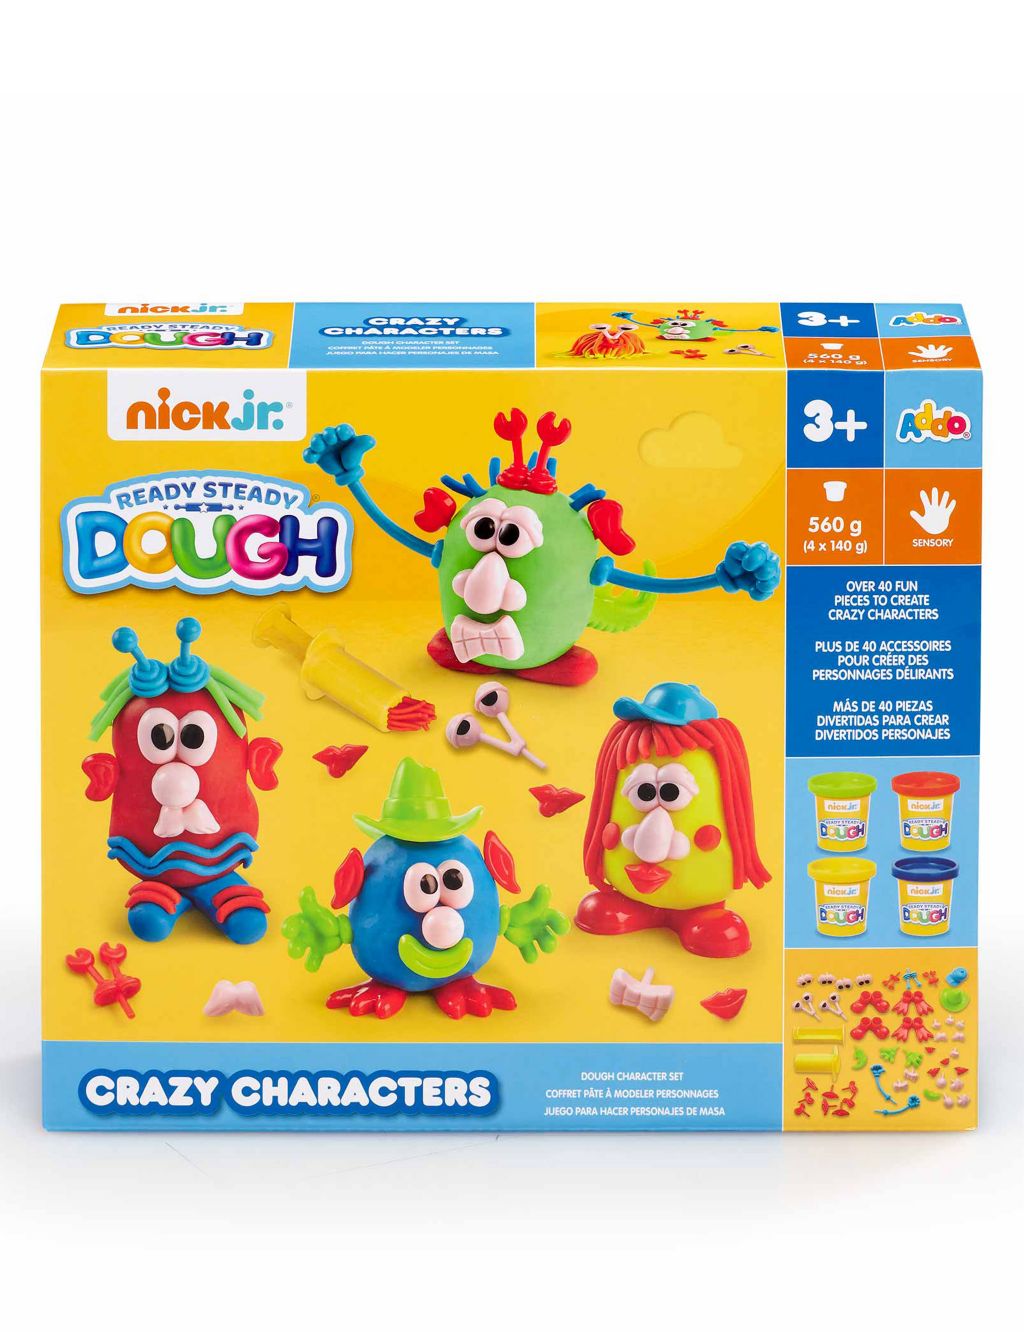 Nick Jr. Ready Steady Dough Crazy Characters Playset (3+ Yrs) image 2